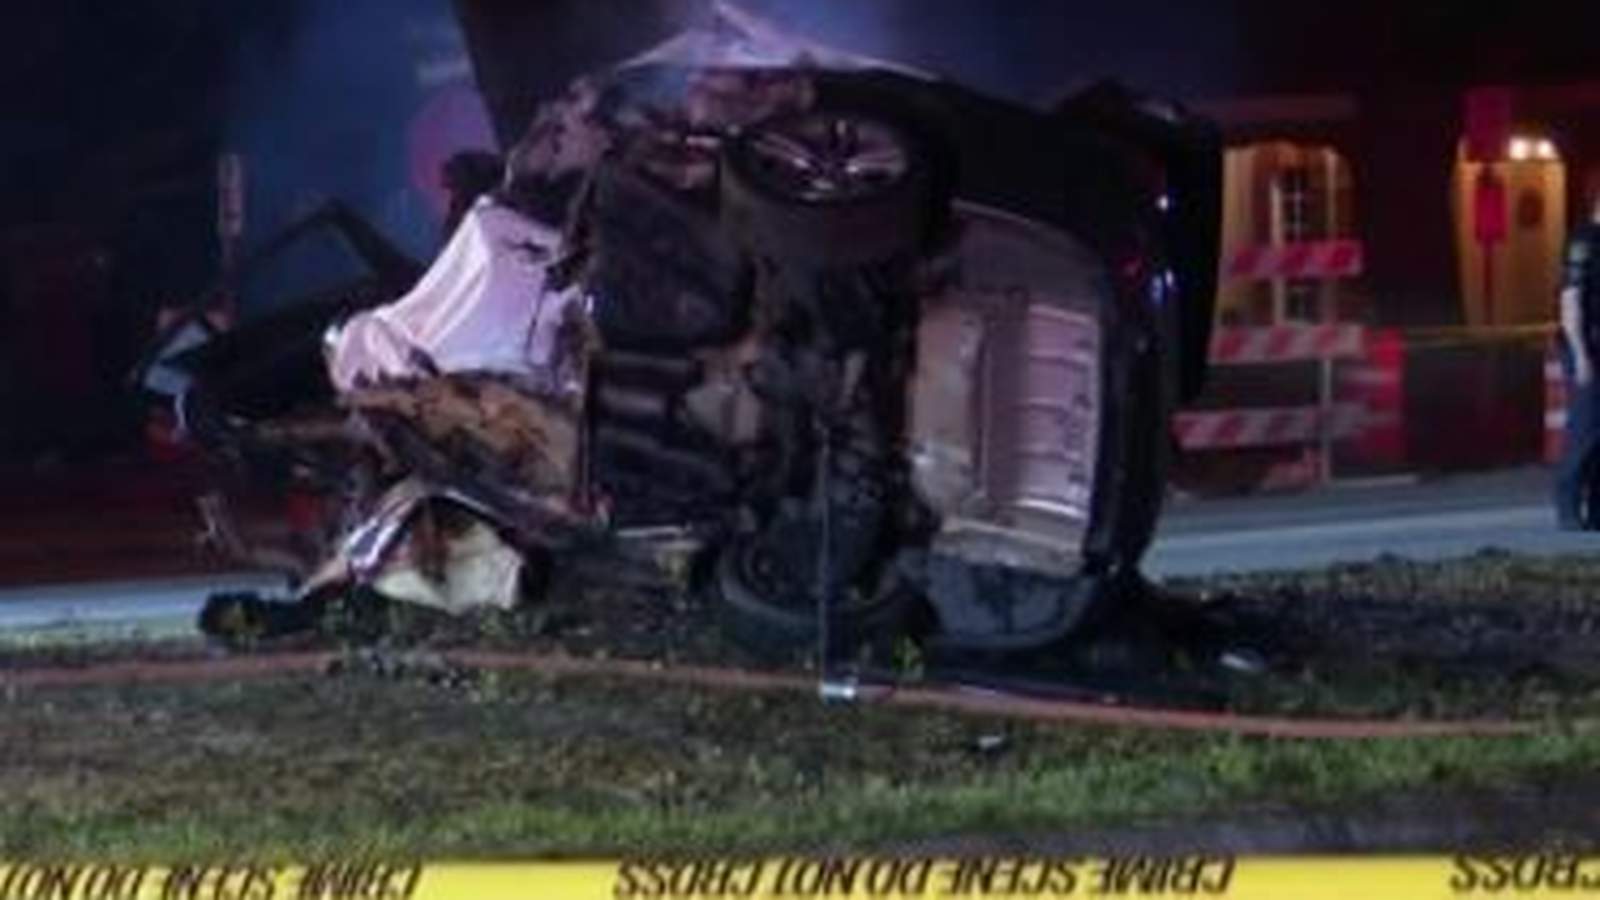 Driver killed in fiery crash after possibly street racing in southwest Houston, police say